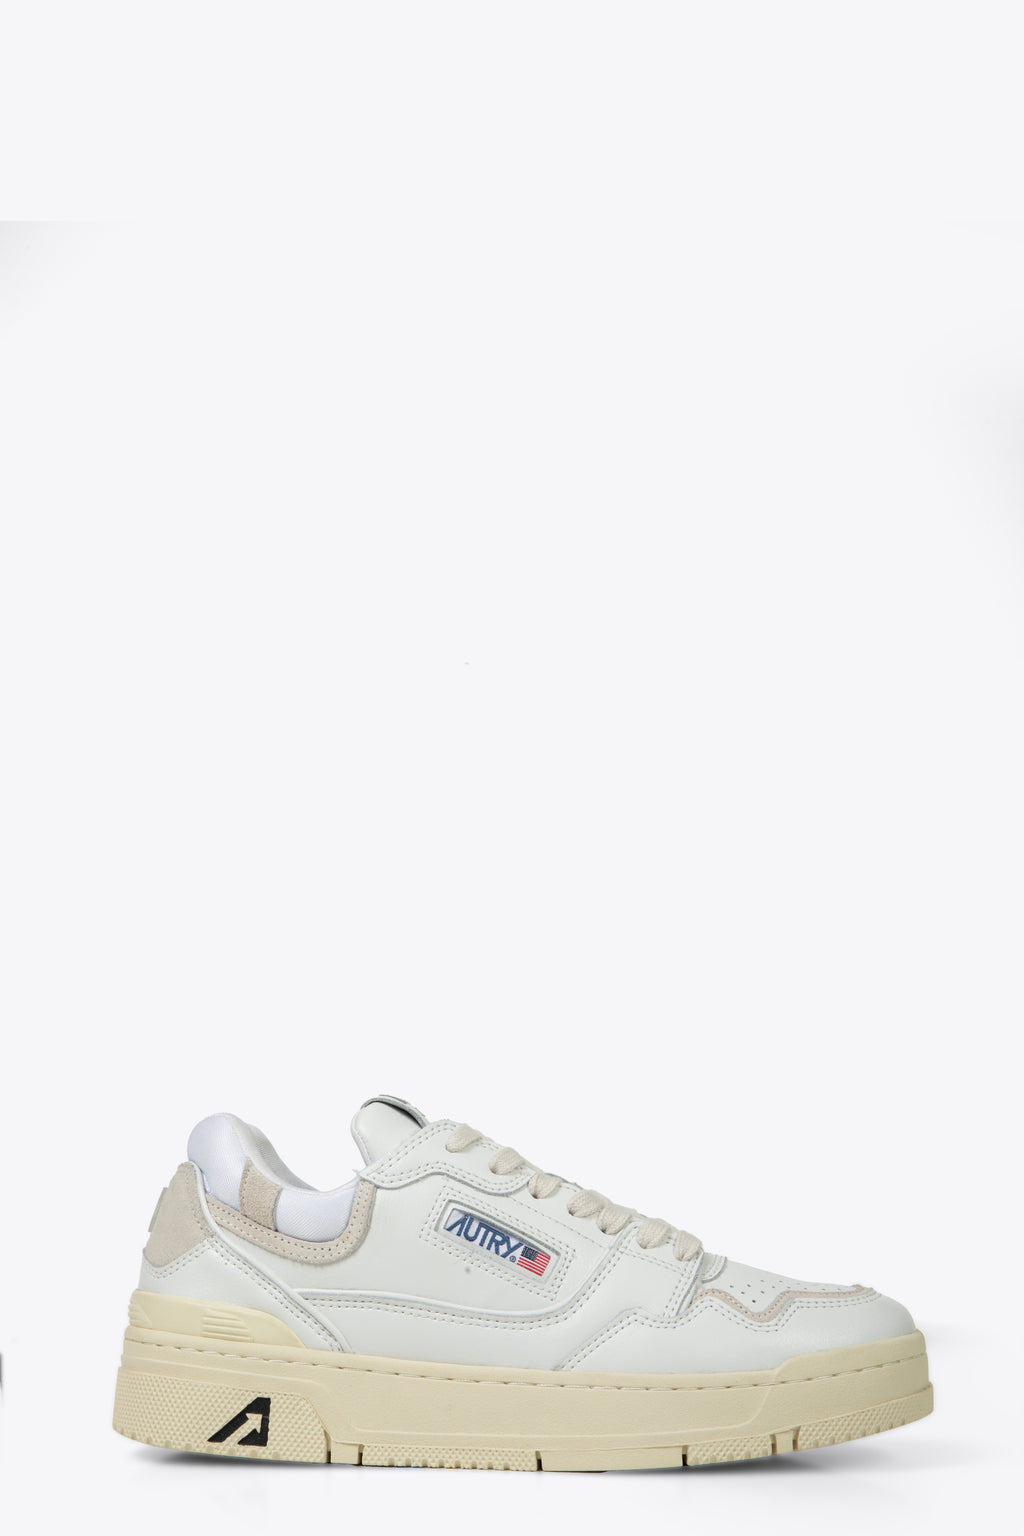 alt-image__White-and-beige-leather-low-skate-sneaker---CLC-low-